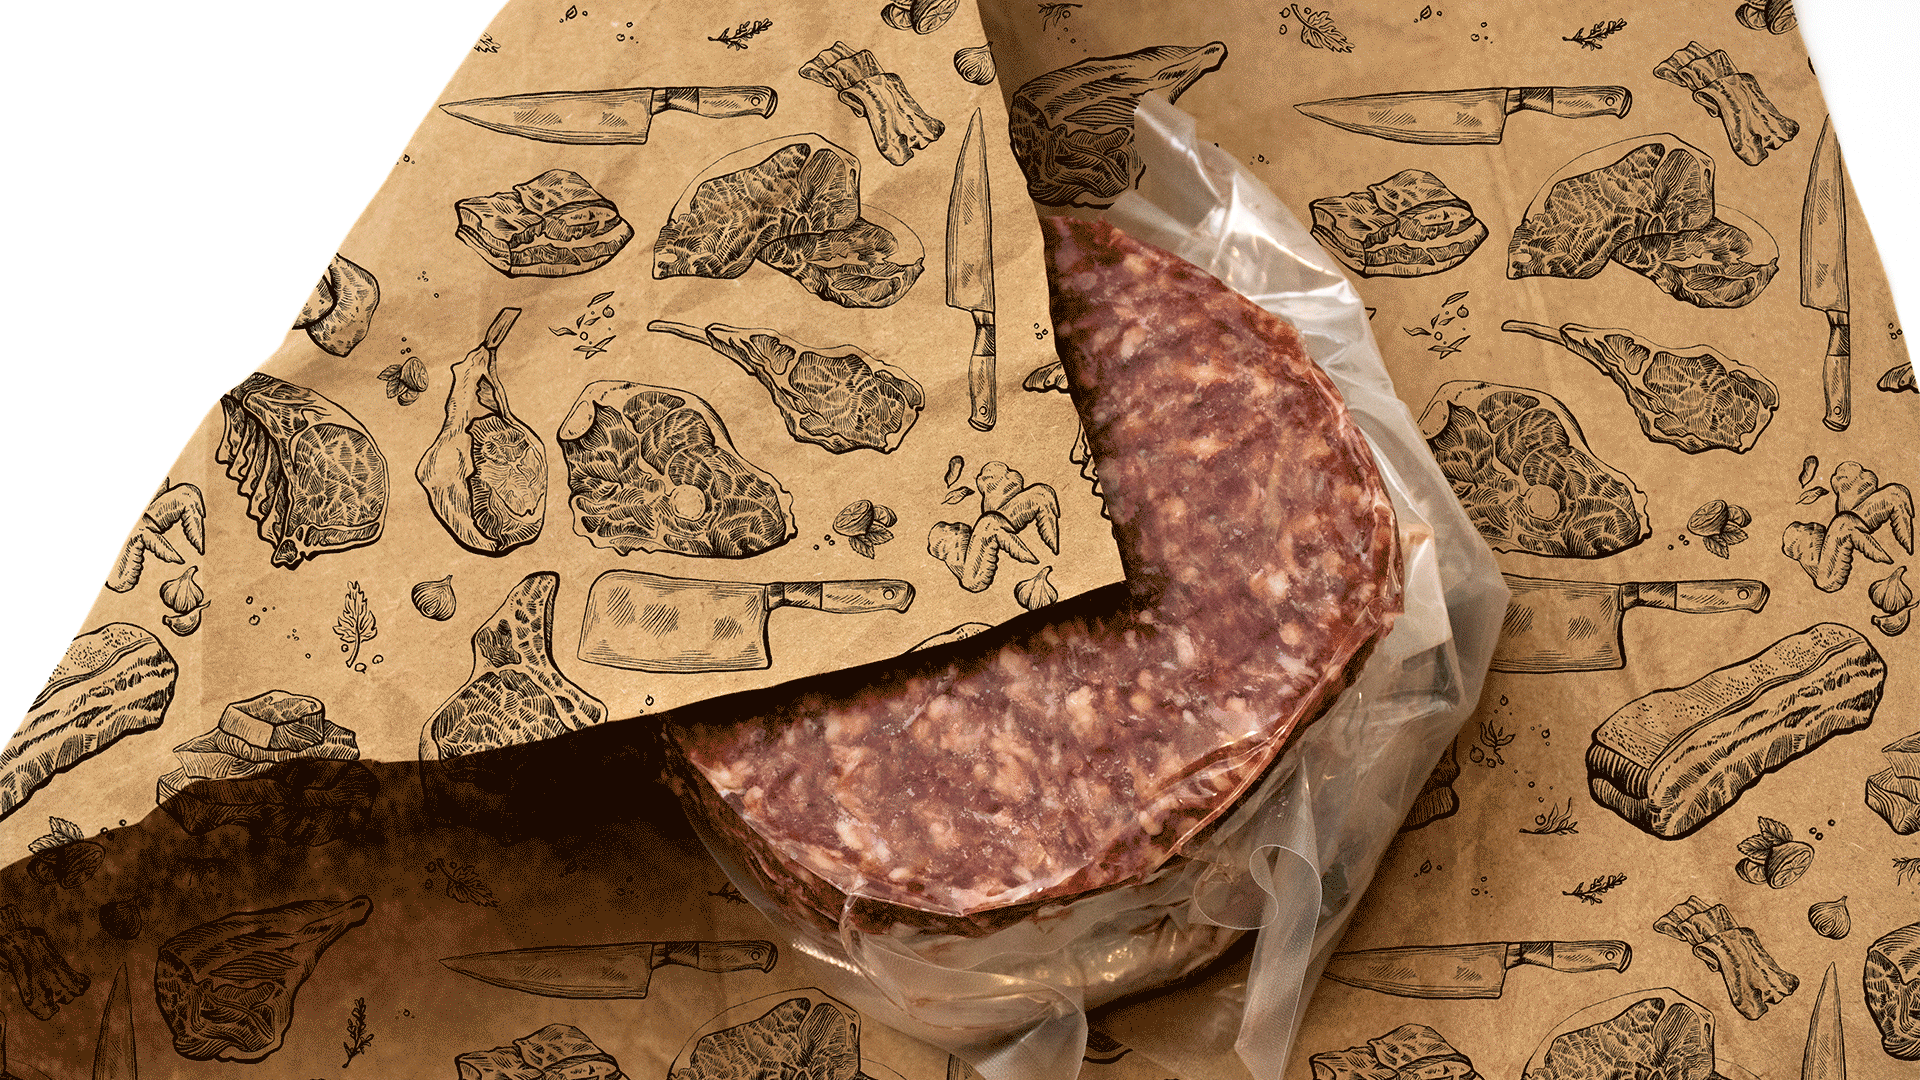 Meat packaging with line work illustration pattern printed on butcher paper.